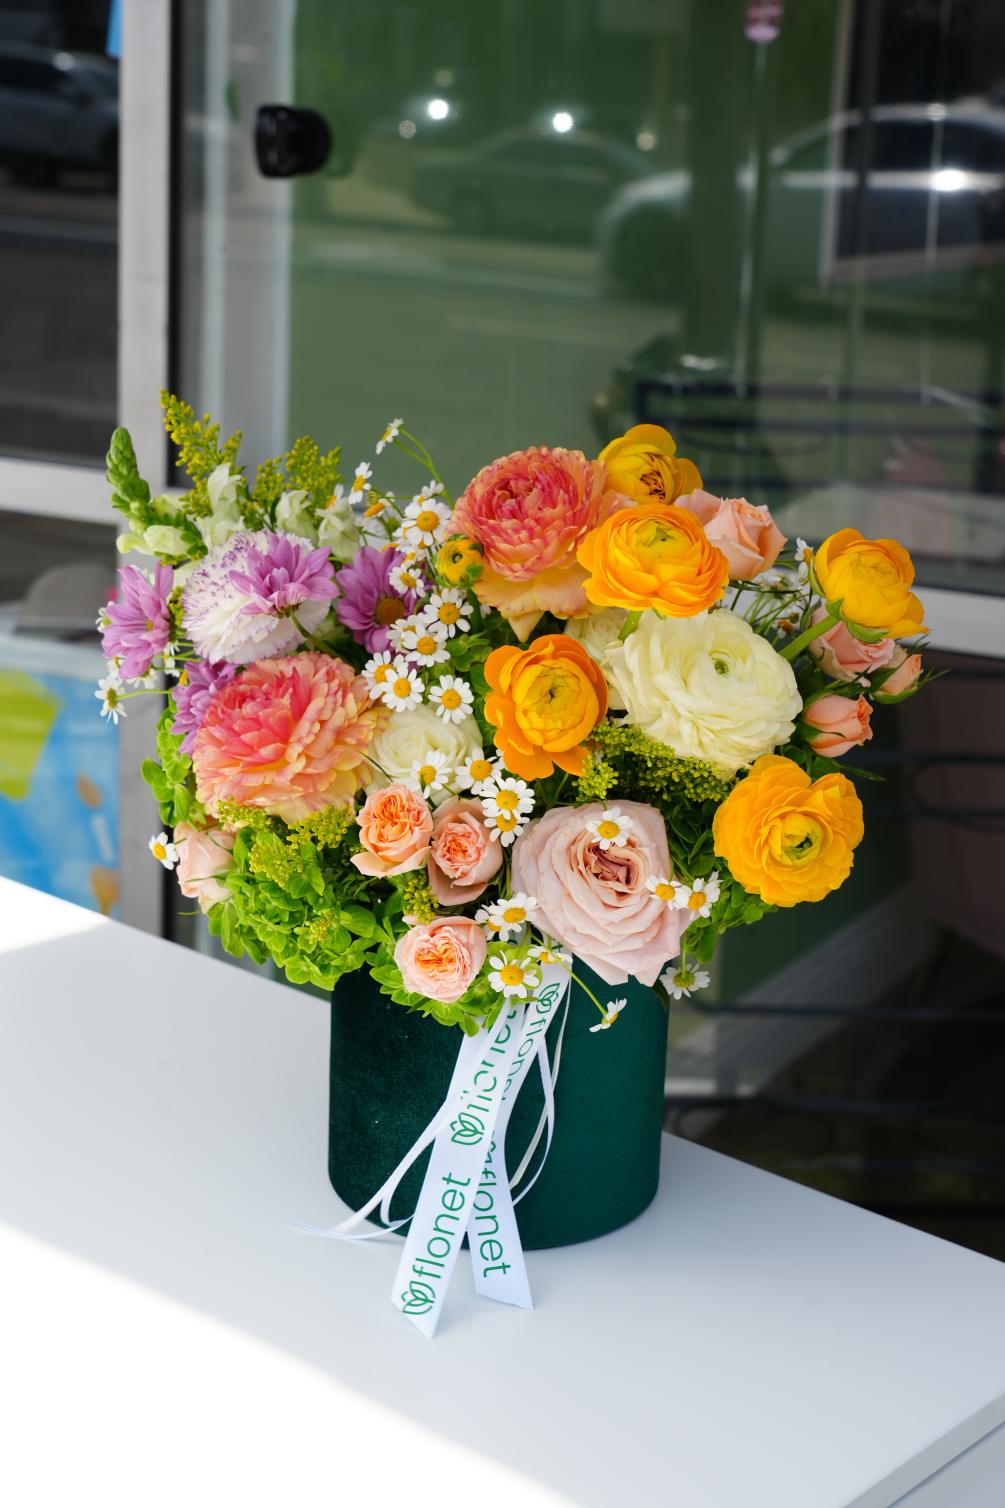 The Sunshine Bliss Arrangement is a vibrant and joyful display of nature&#039;s